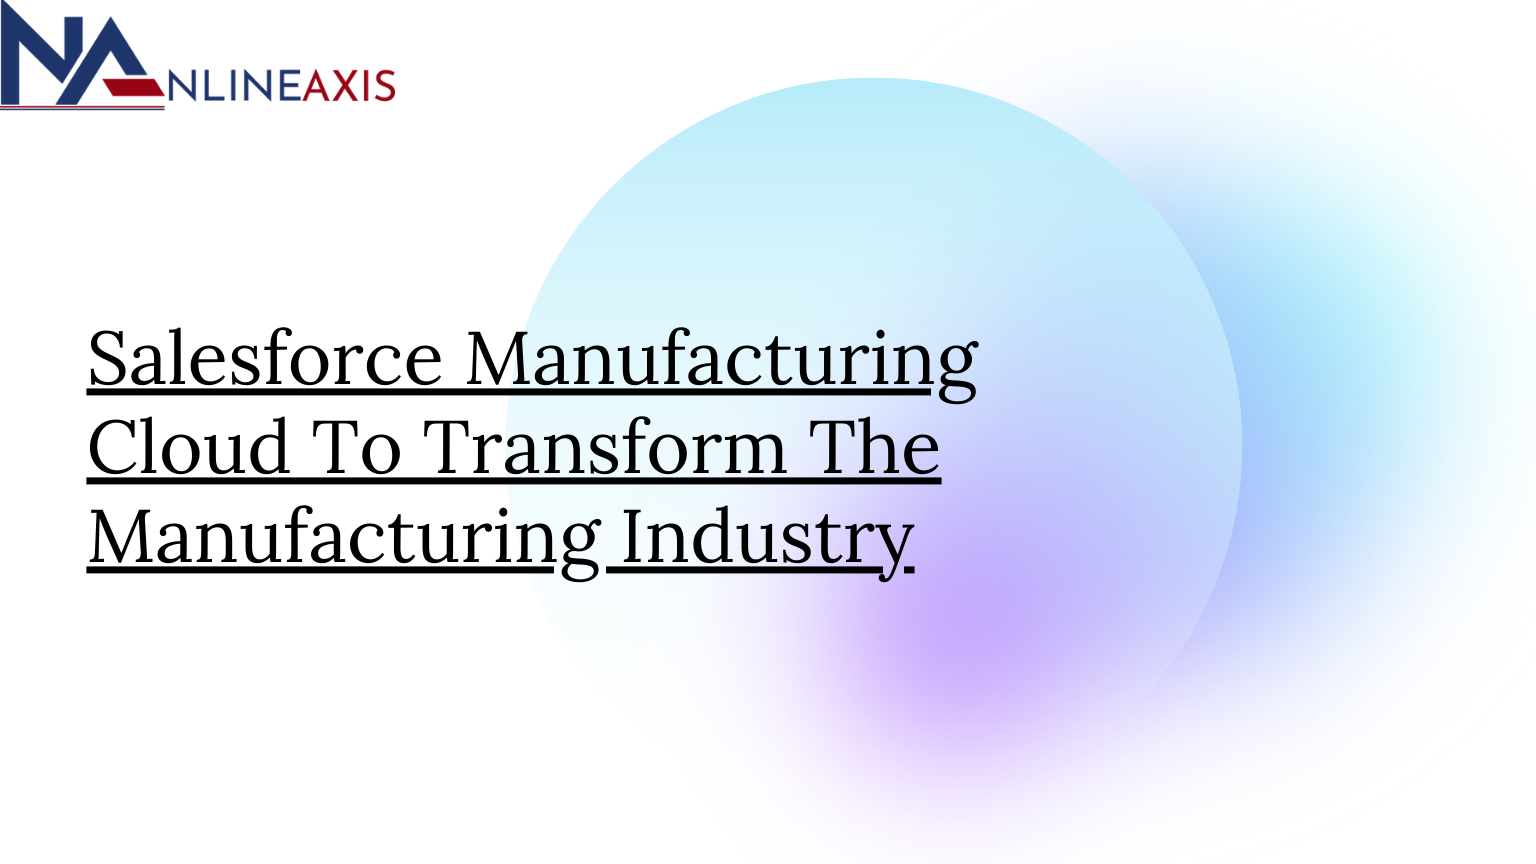 Salesforce Manufacturing Cloud To Transform The Manufacturing Industry